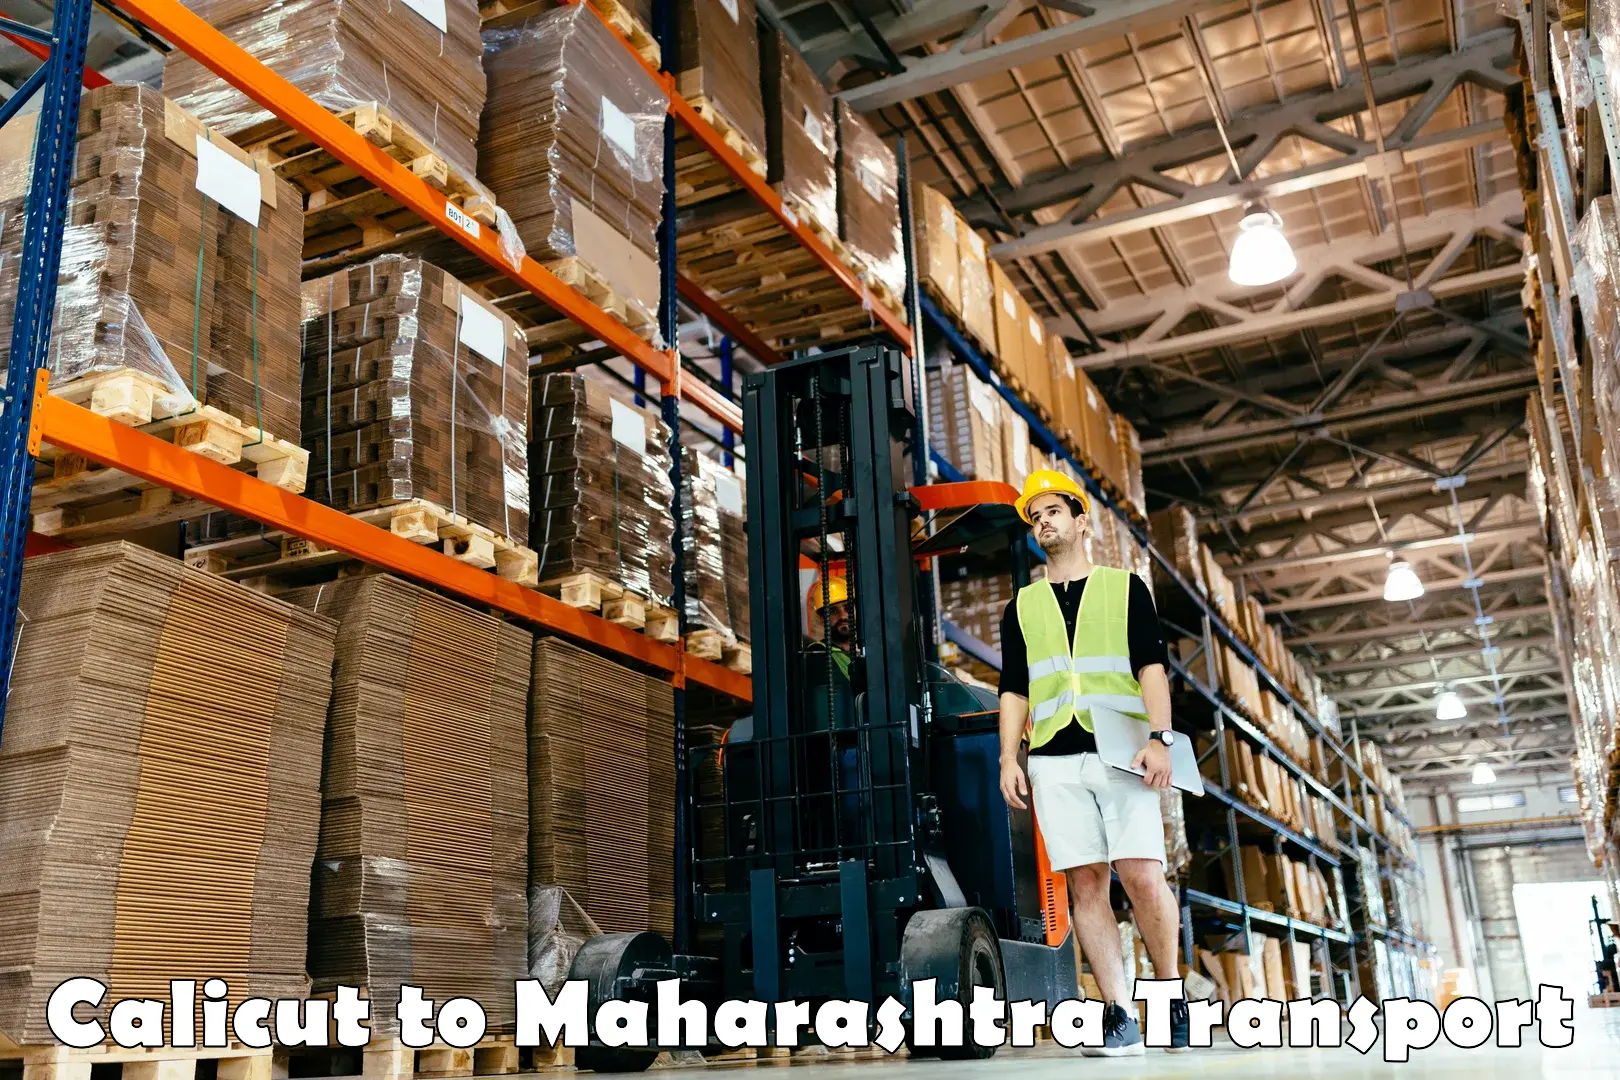 Goods delivery service Calicut to Chandrapur